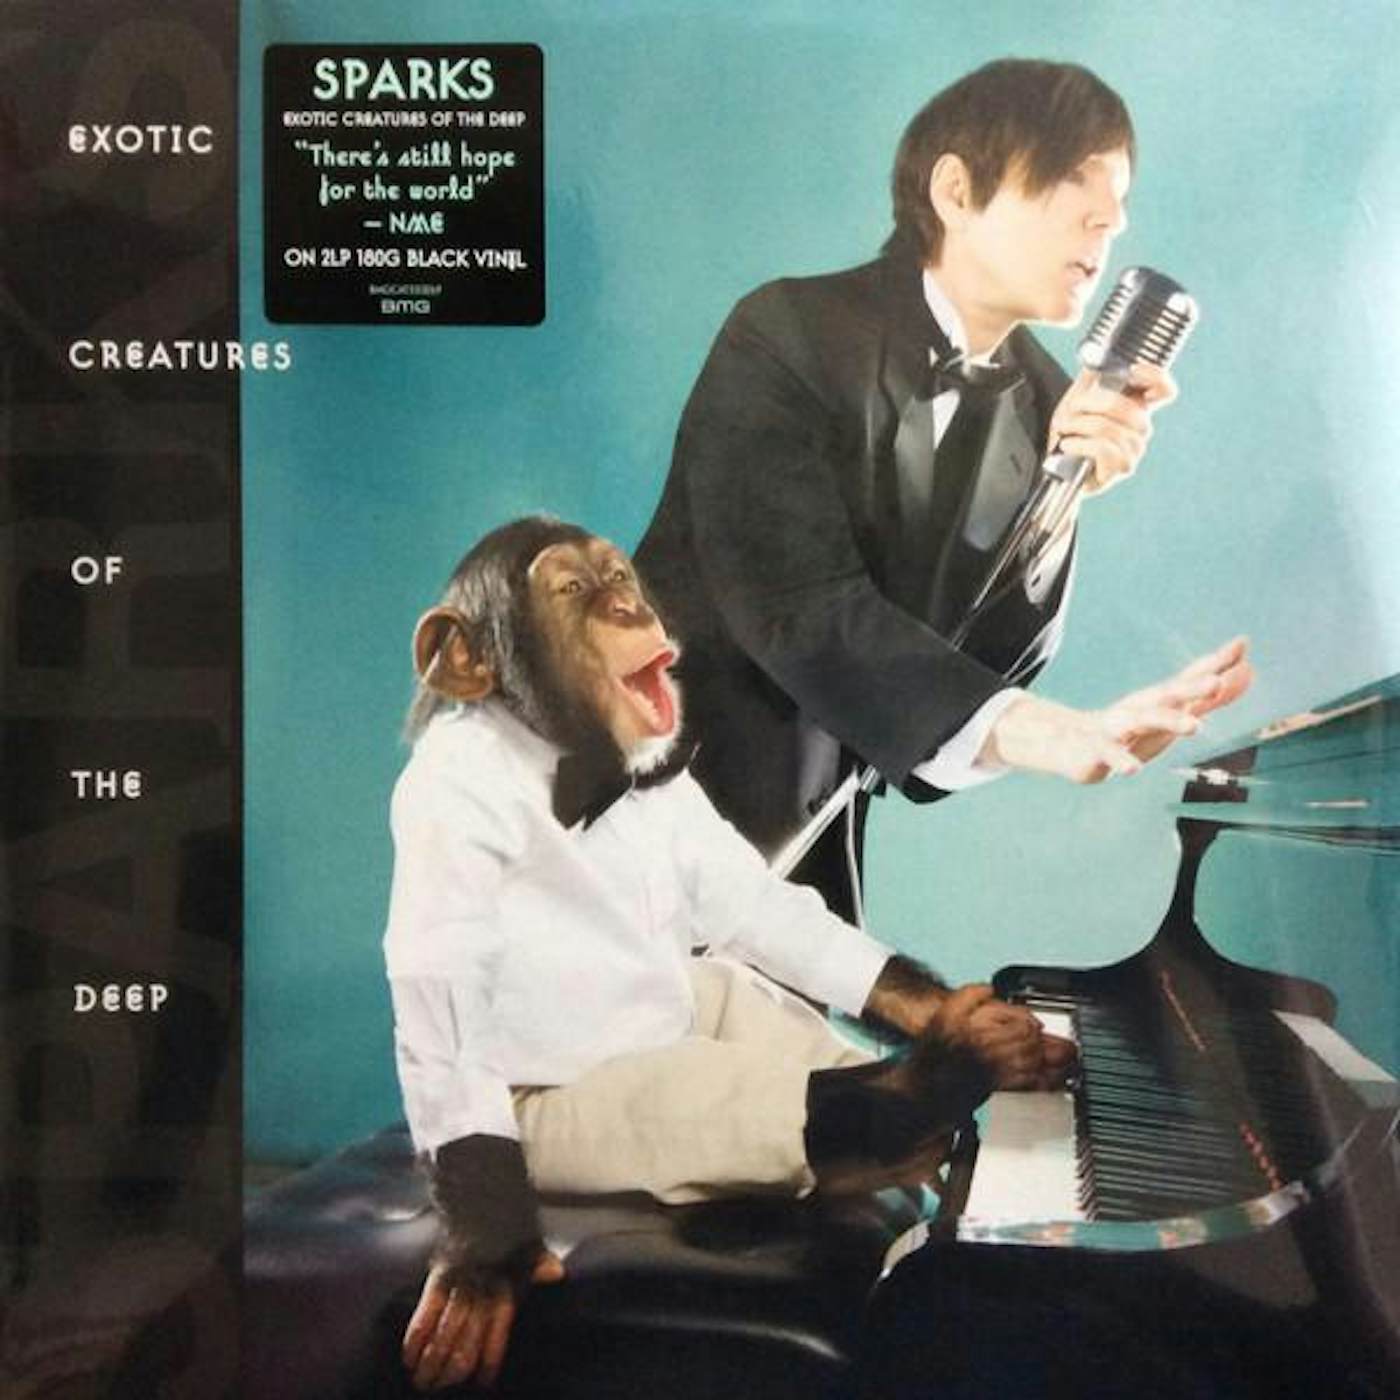 Sparks Exotic Creatures of the Deep Edition (2LP) Vinyl Record